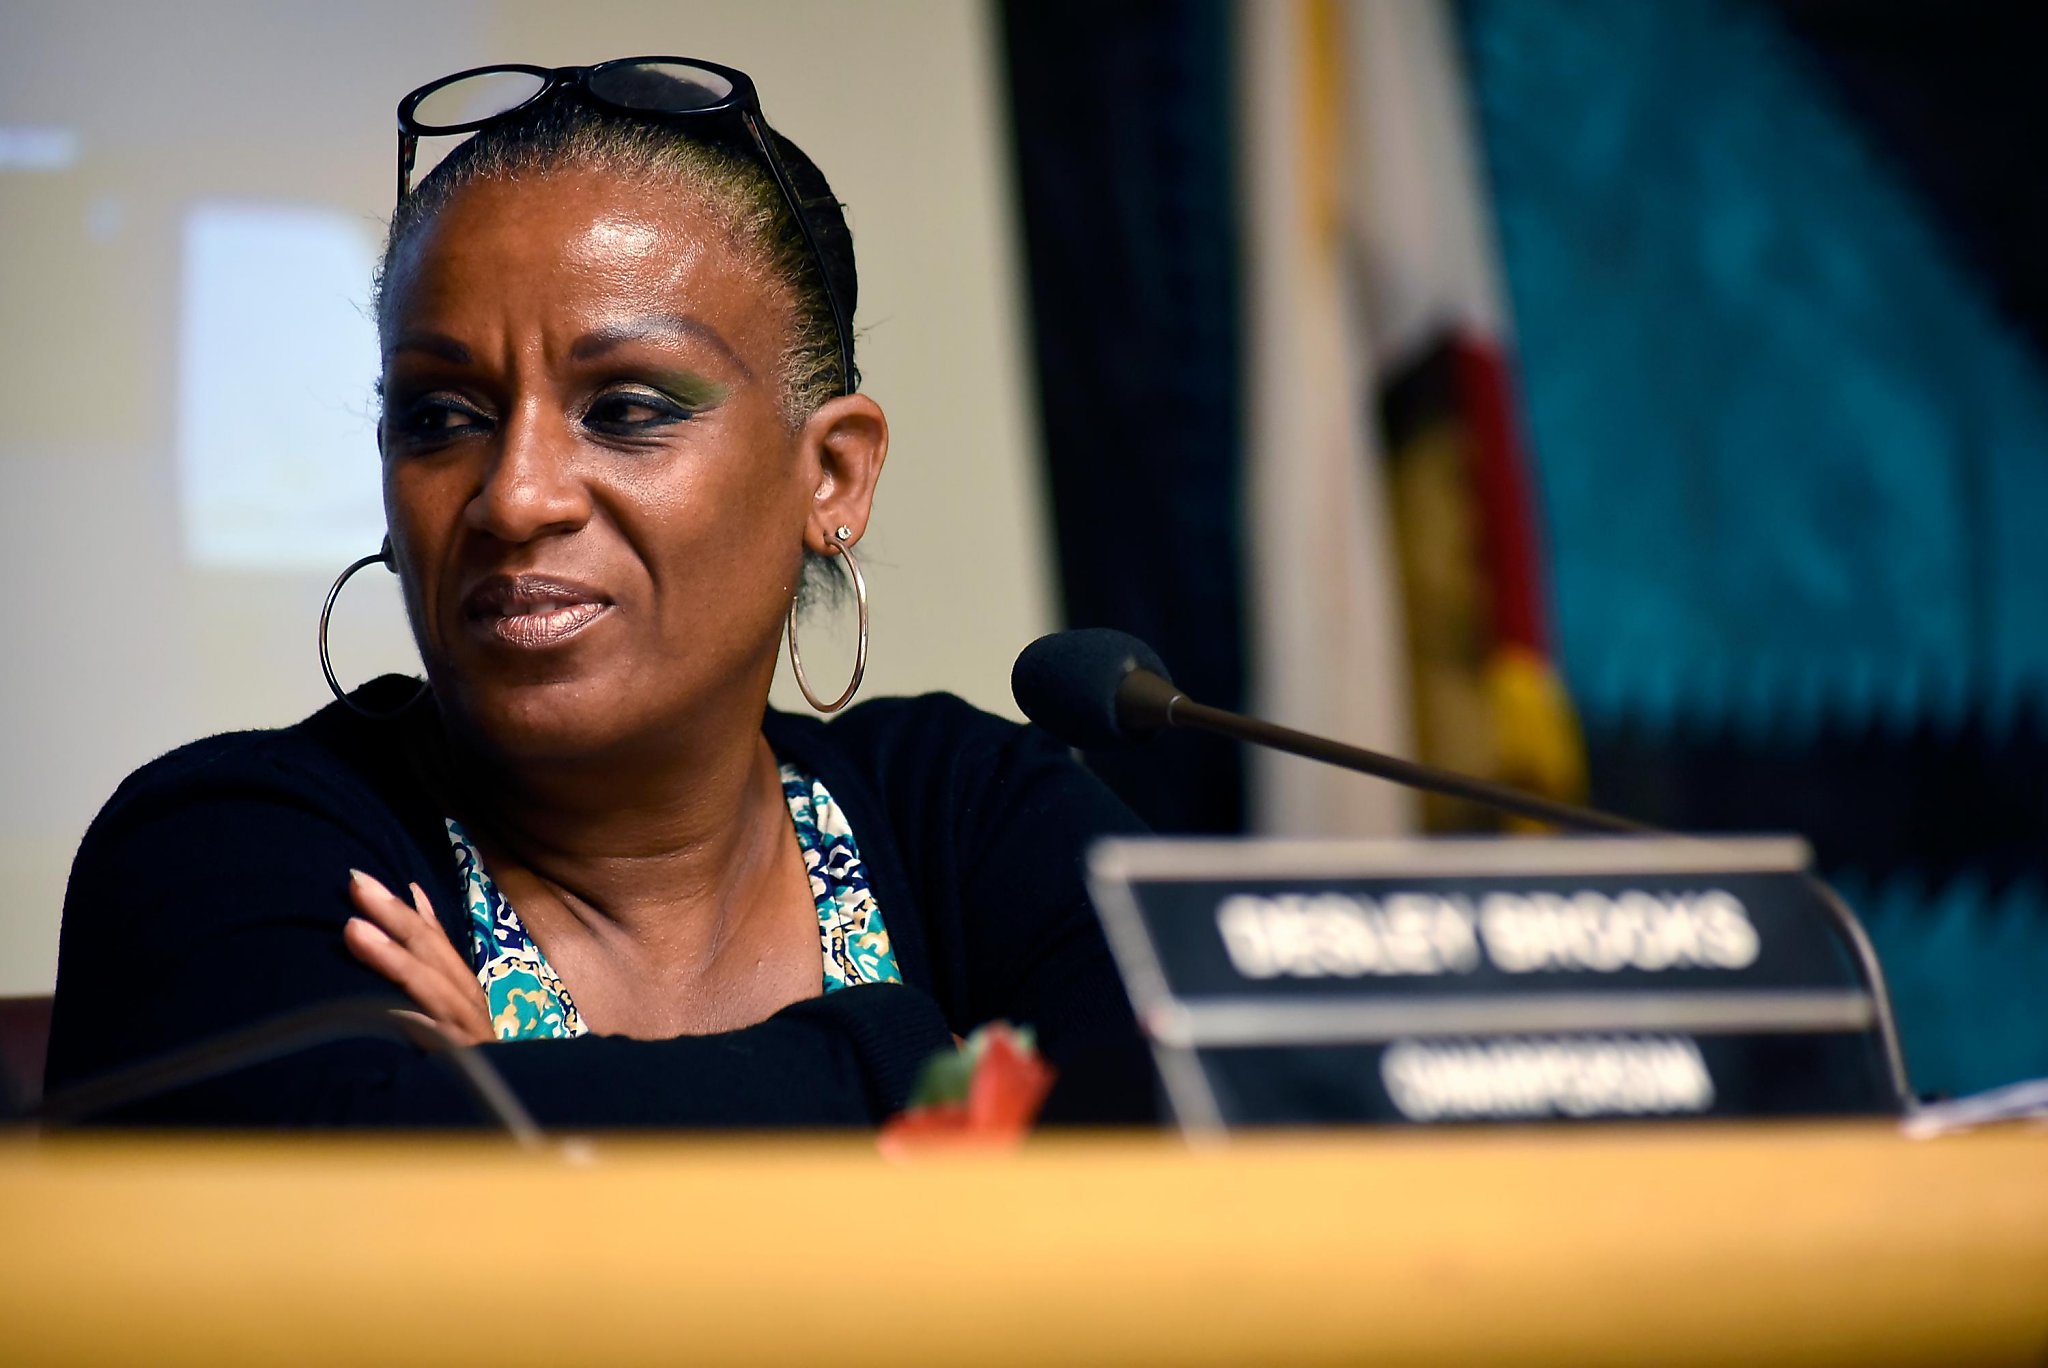 Oakland City Council's startling move on police oversight pacts - San Francisco Chronicle